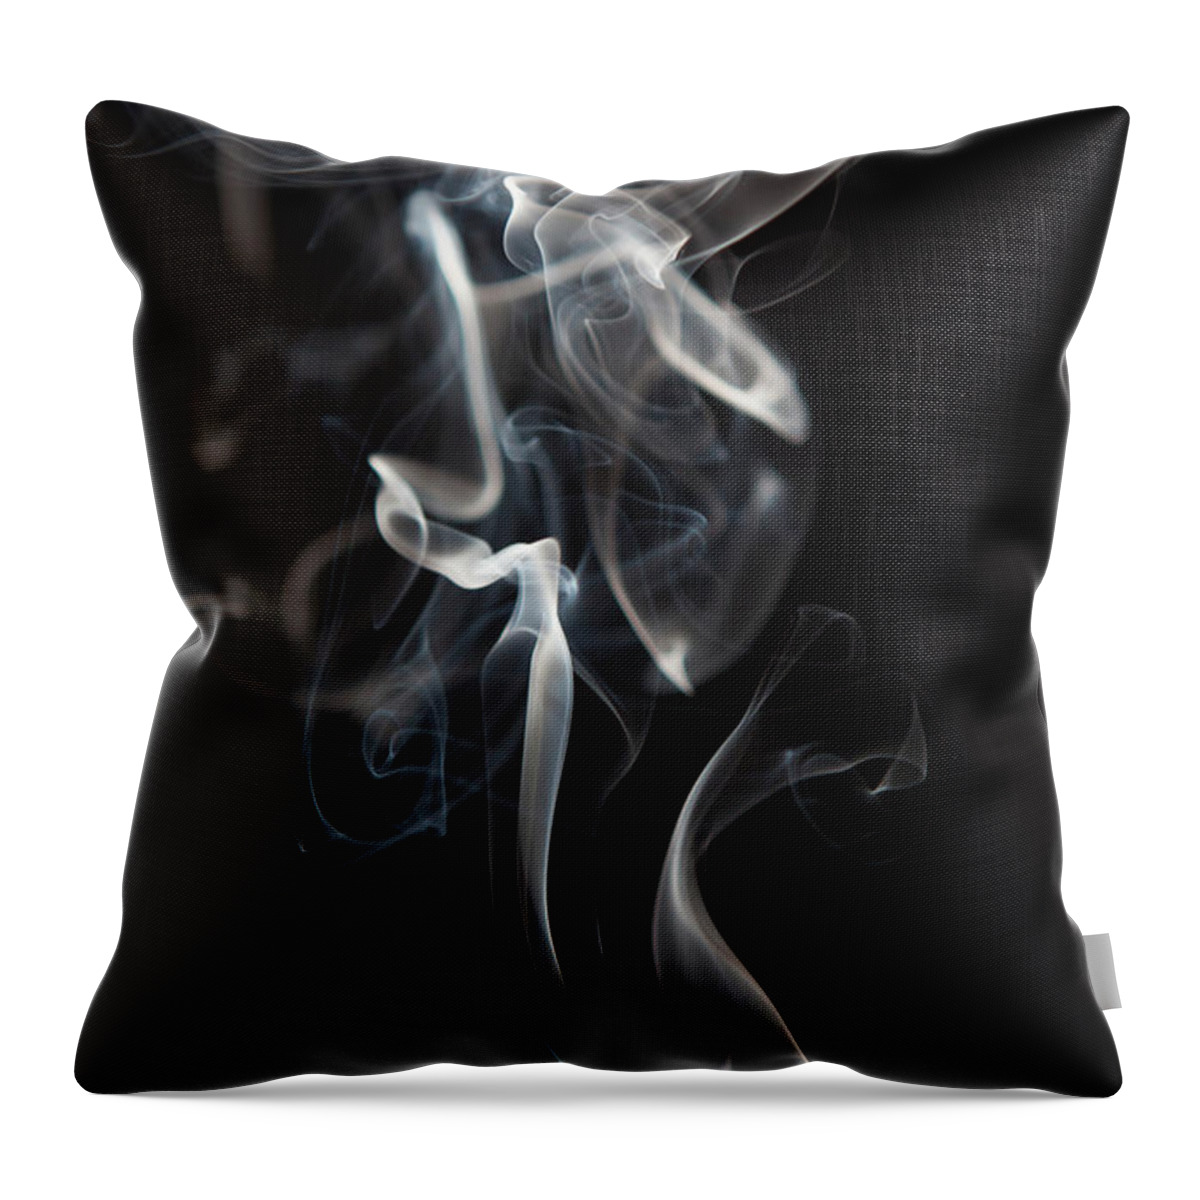 Black Background Throw Pillow featuring the photograph Smoke Trail Against Black Background by Jasper James